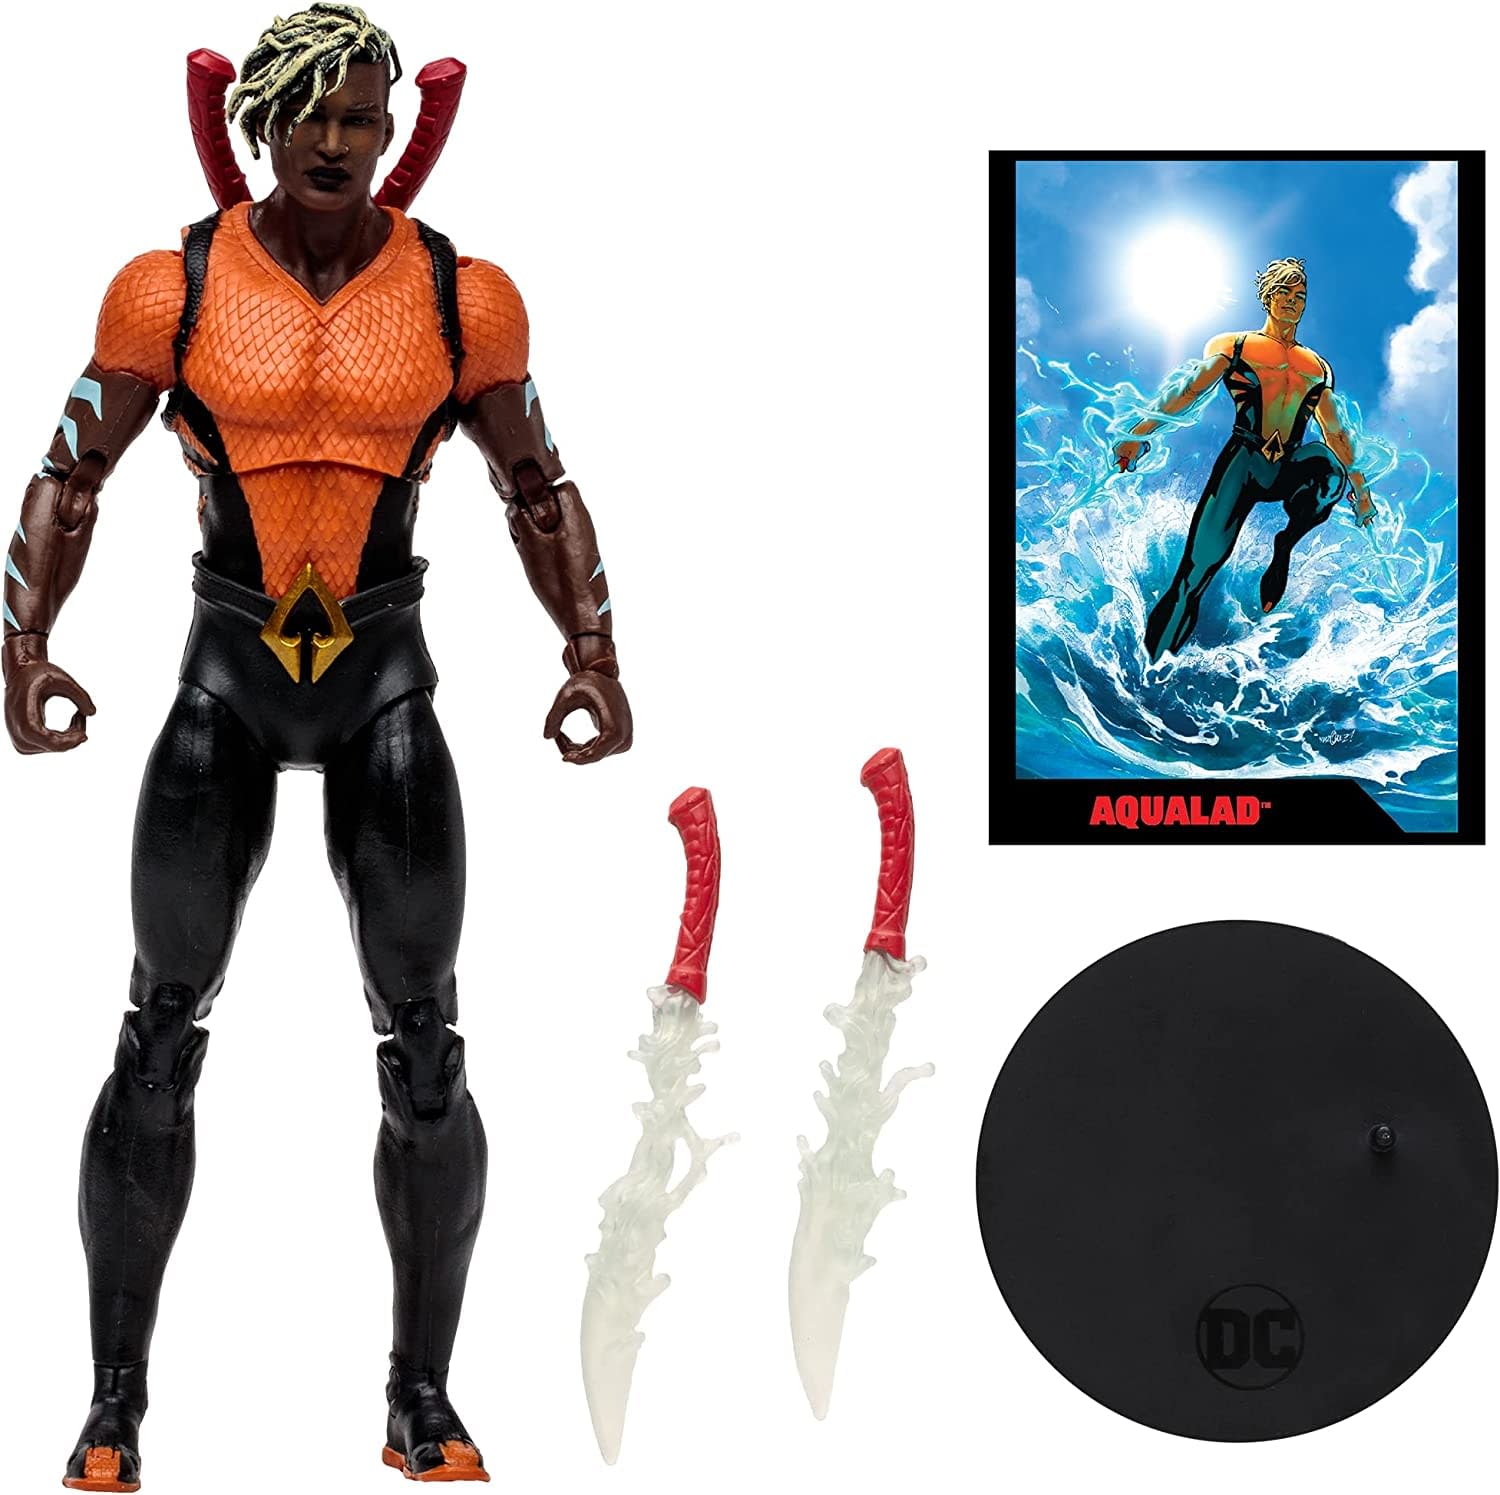 DC Comics Aqualad Joins the DC Multiverse with McFarlane Toys